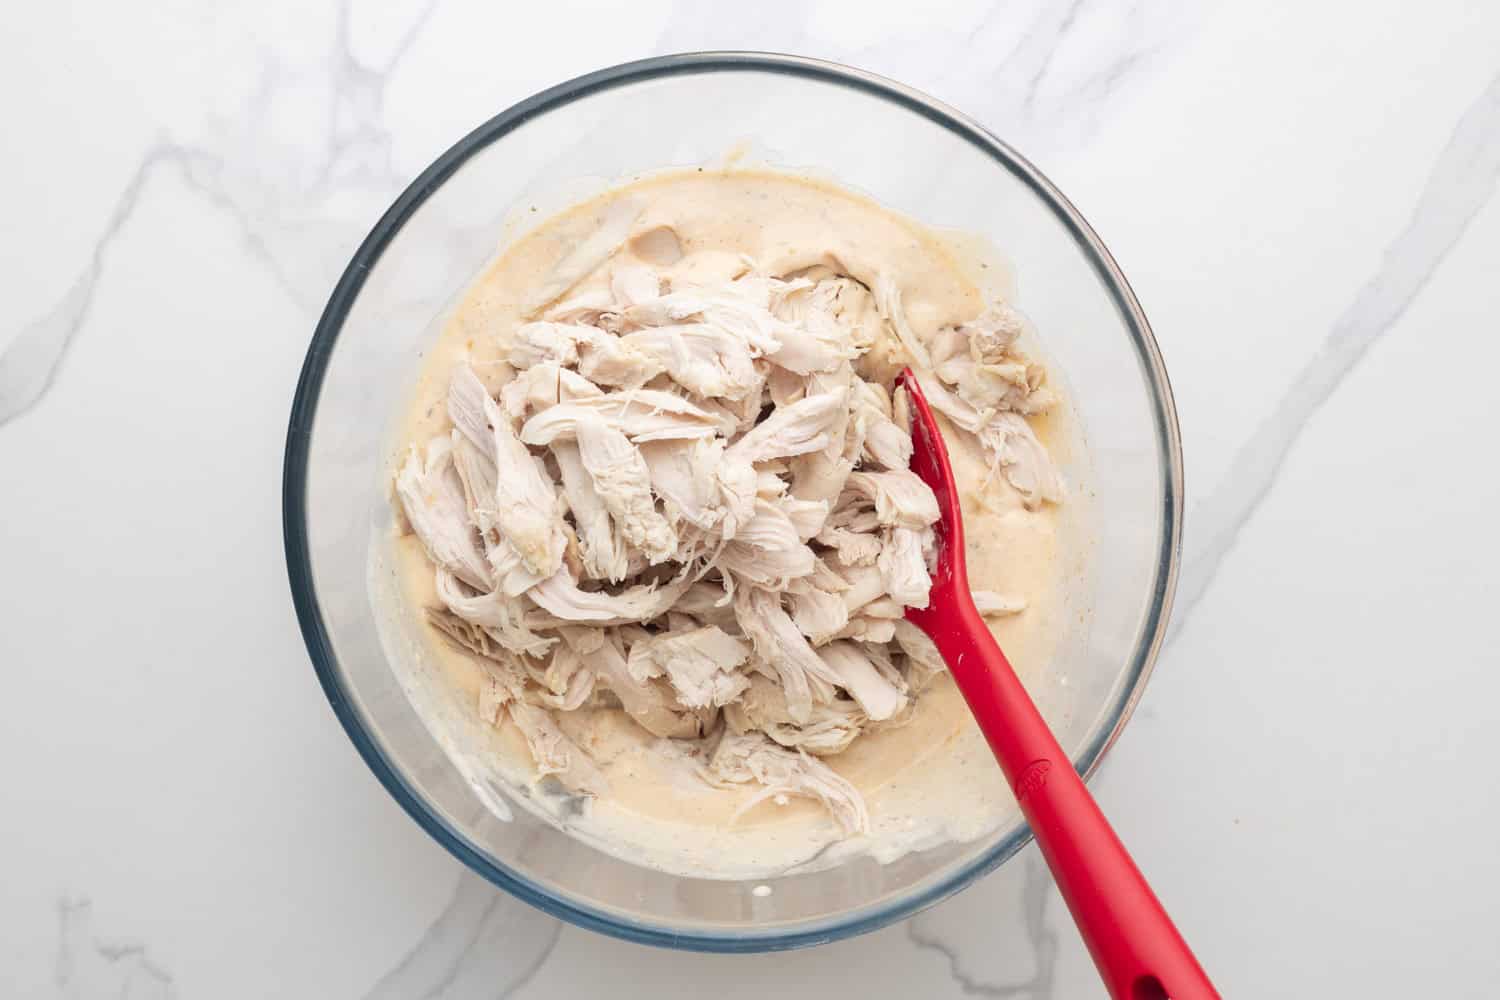 shredded rotisserie chicken added to creamy mixture in a glass bowl .